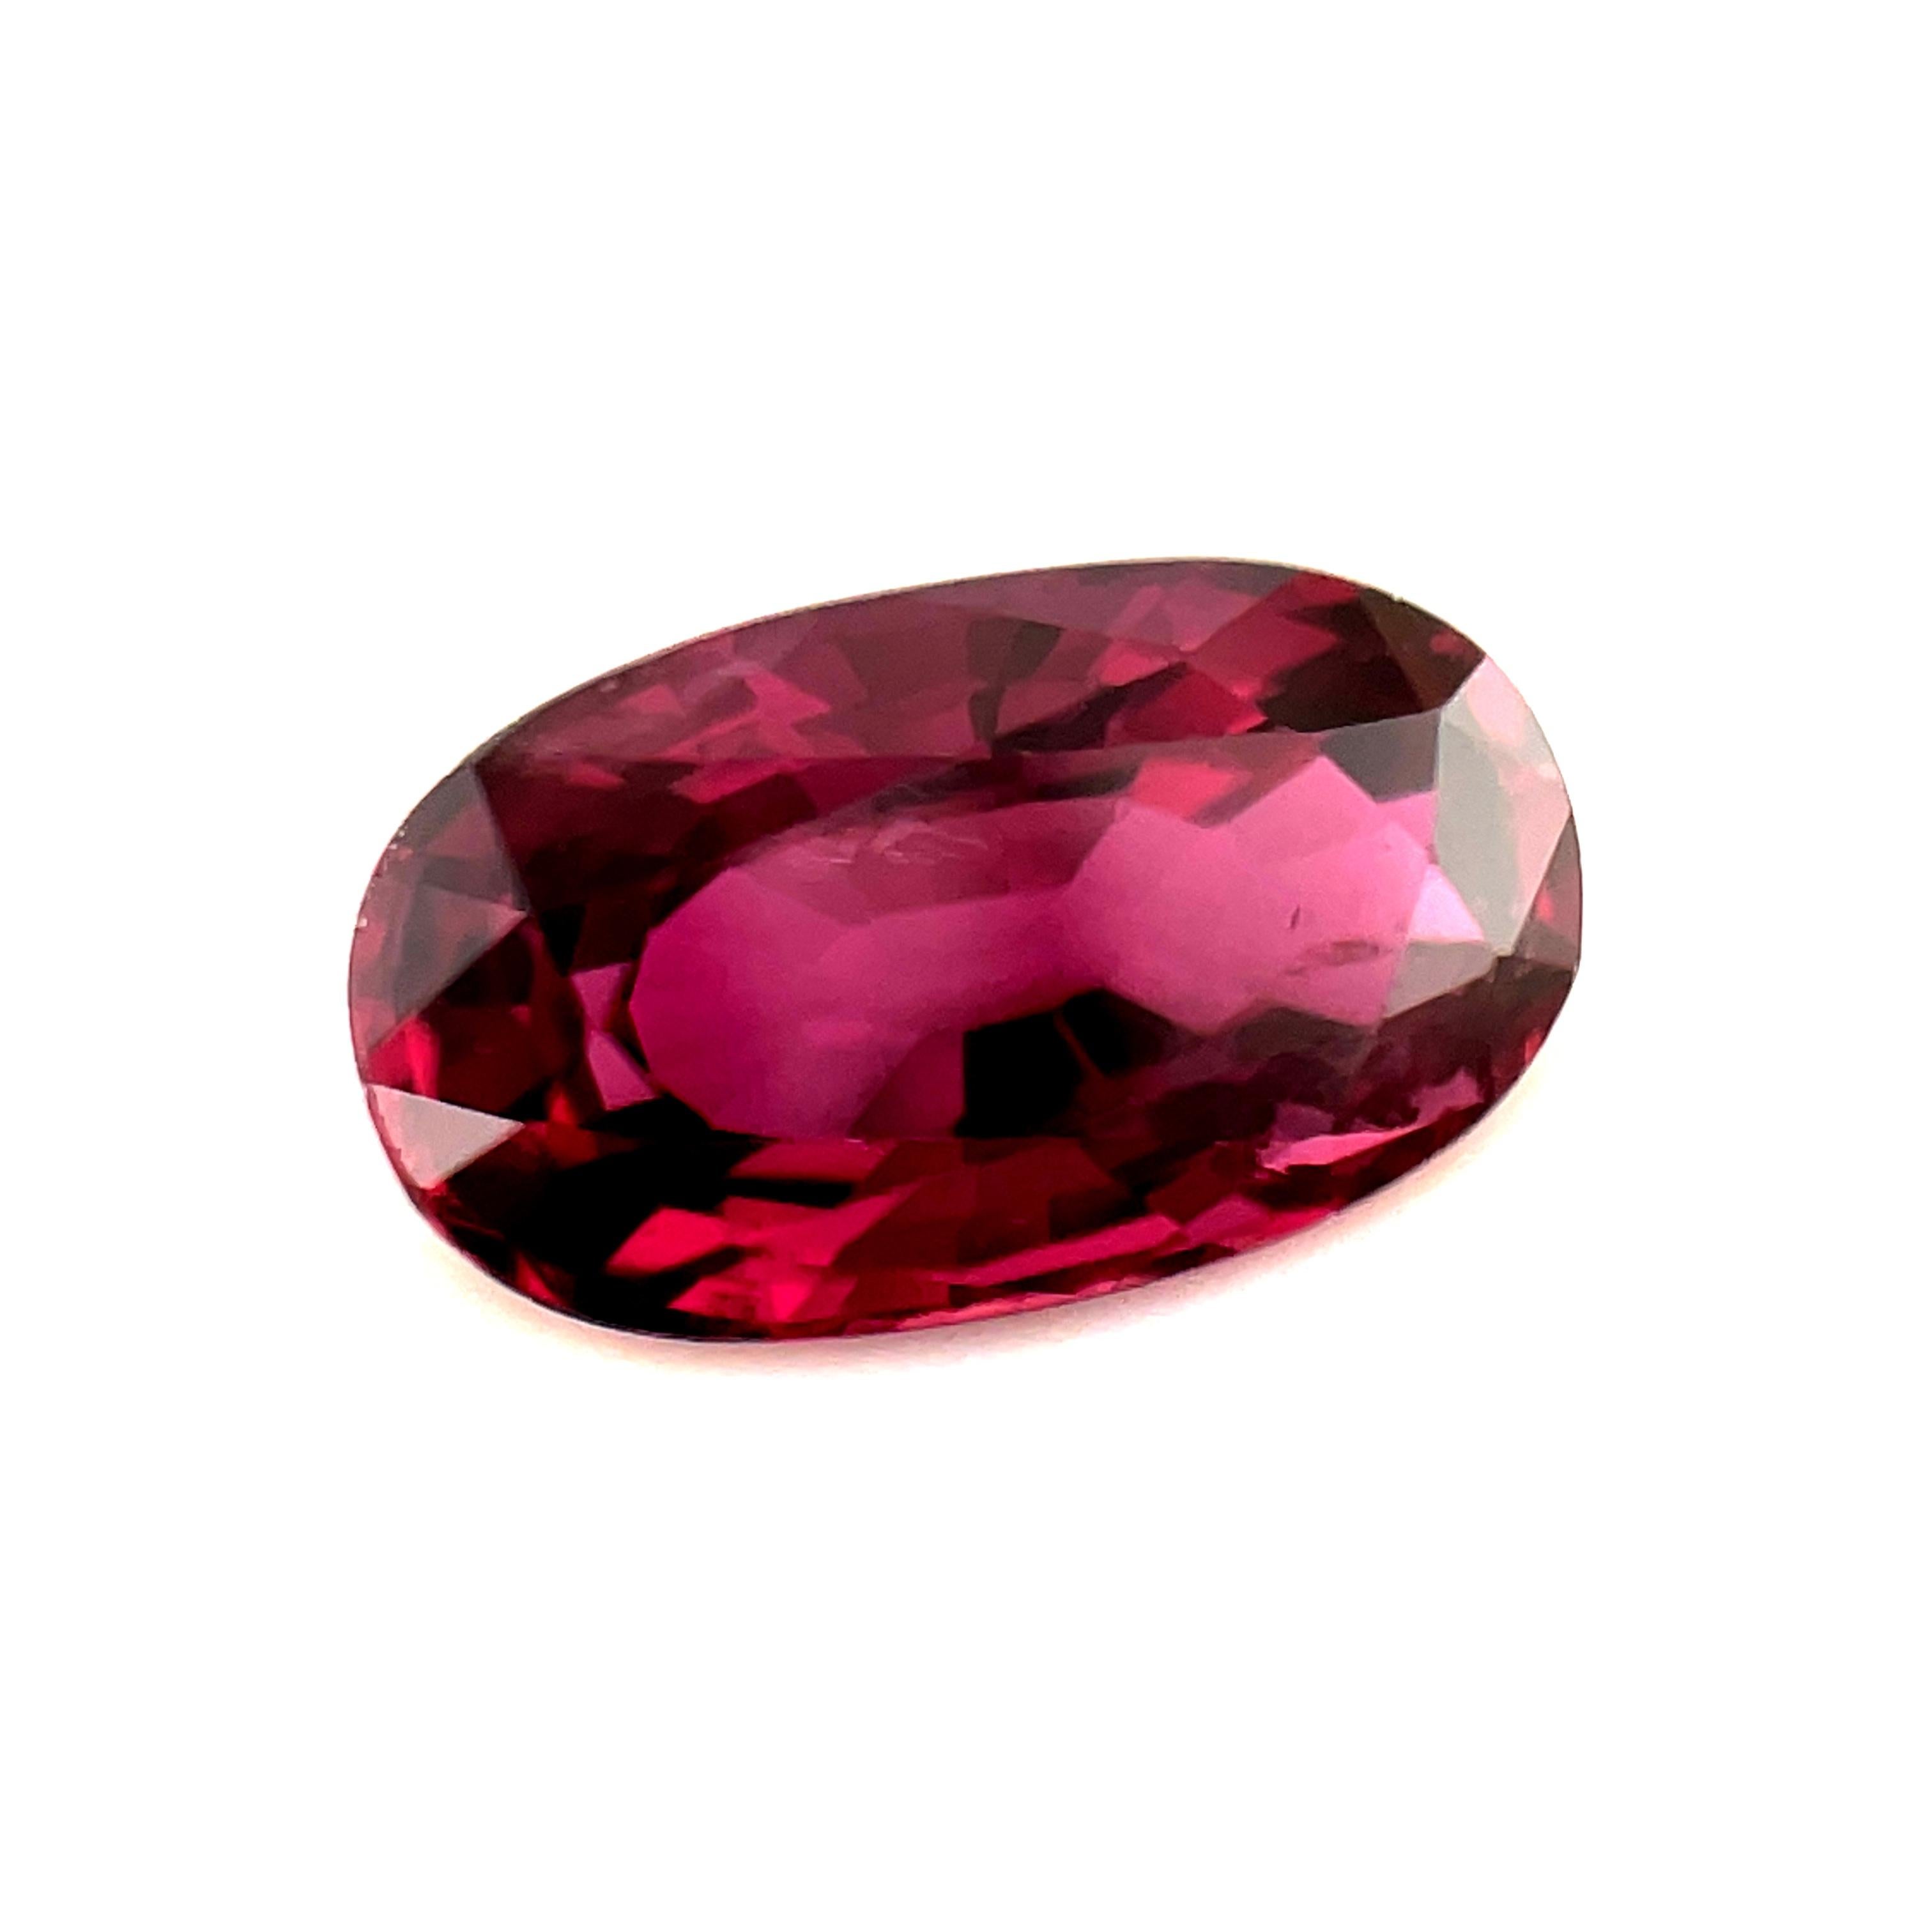 Artisan Loose Ruby Gemstone for Engagement or 3-Stone Ring, 1.46 Carat Oval  For Sale